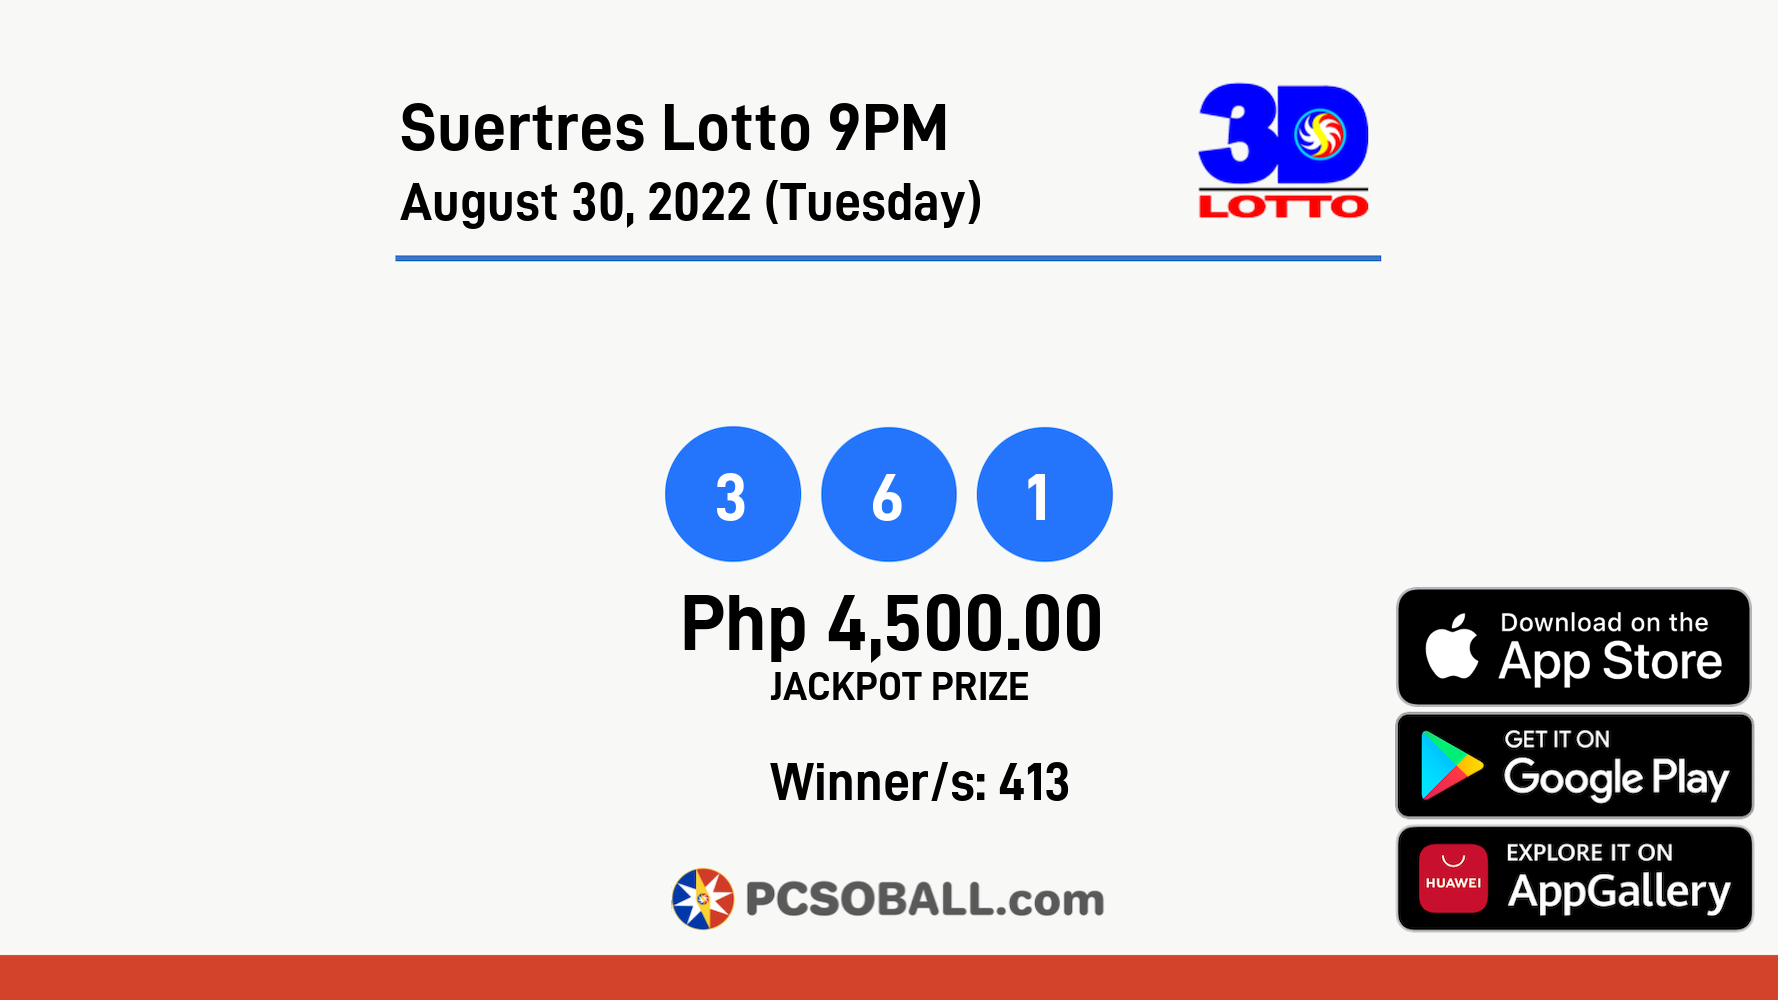 Suertres Lotto 9PM August 30, 2022 (Tuesday) Result